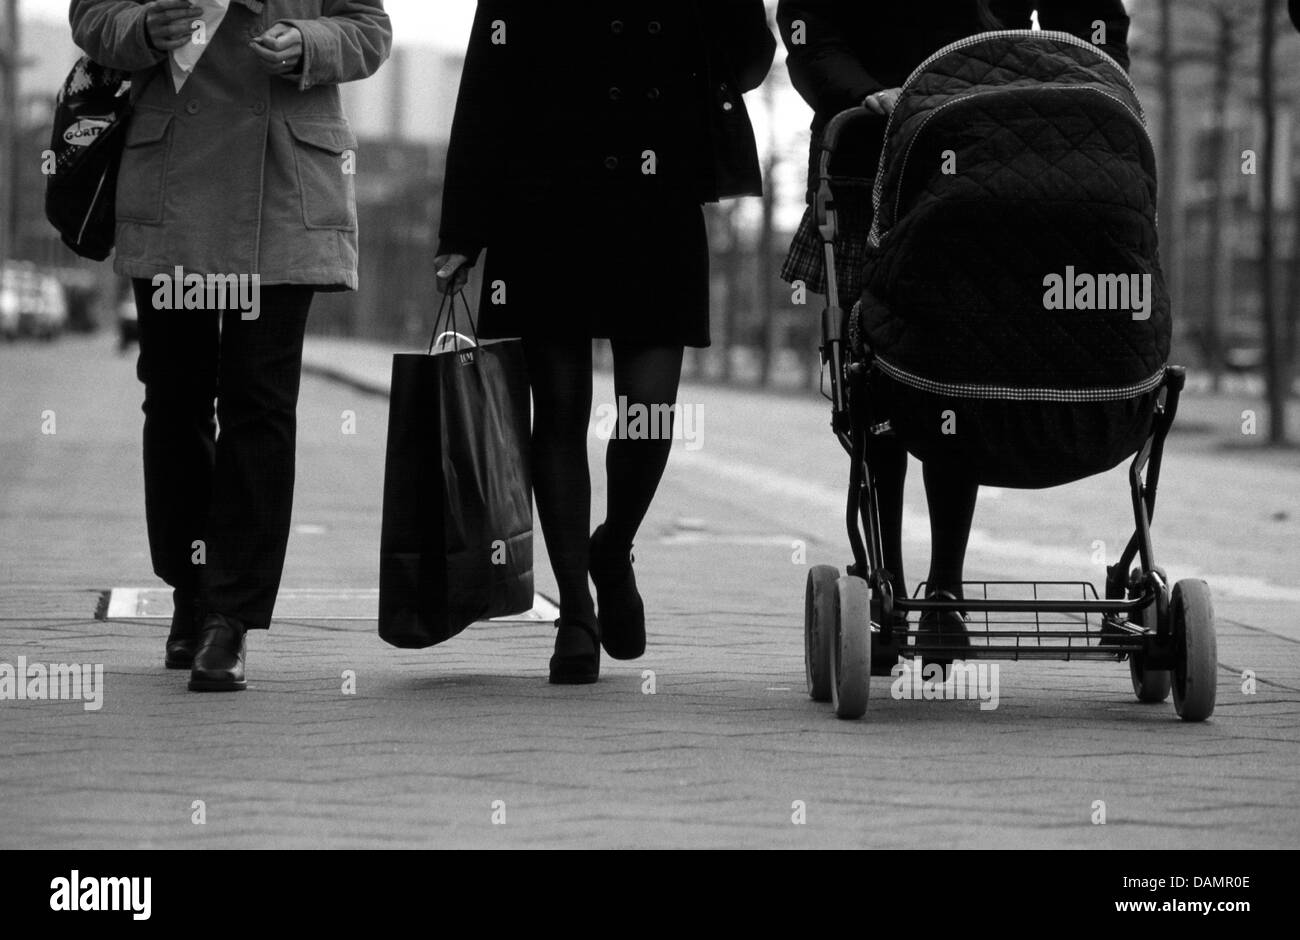 Baby buggy shopping Black and White Stock Photos & Images - Alamy